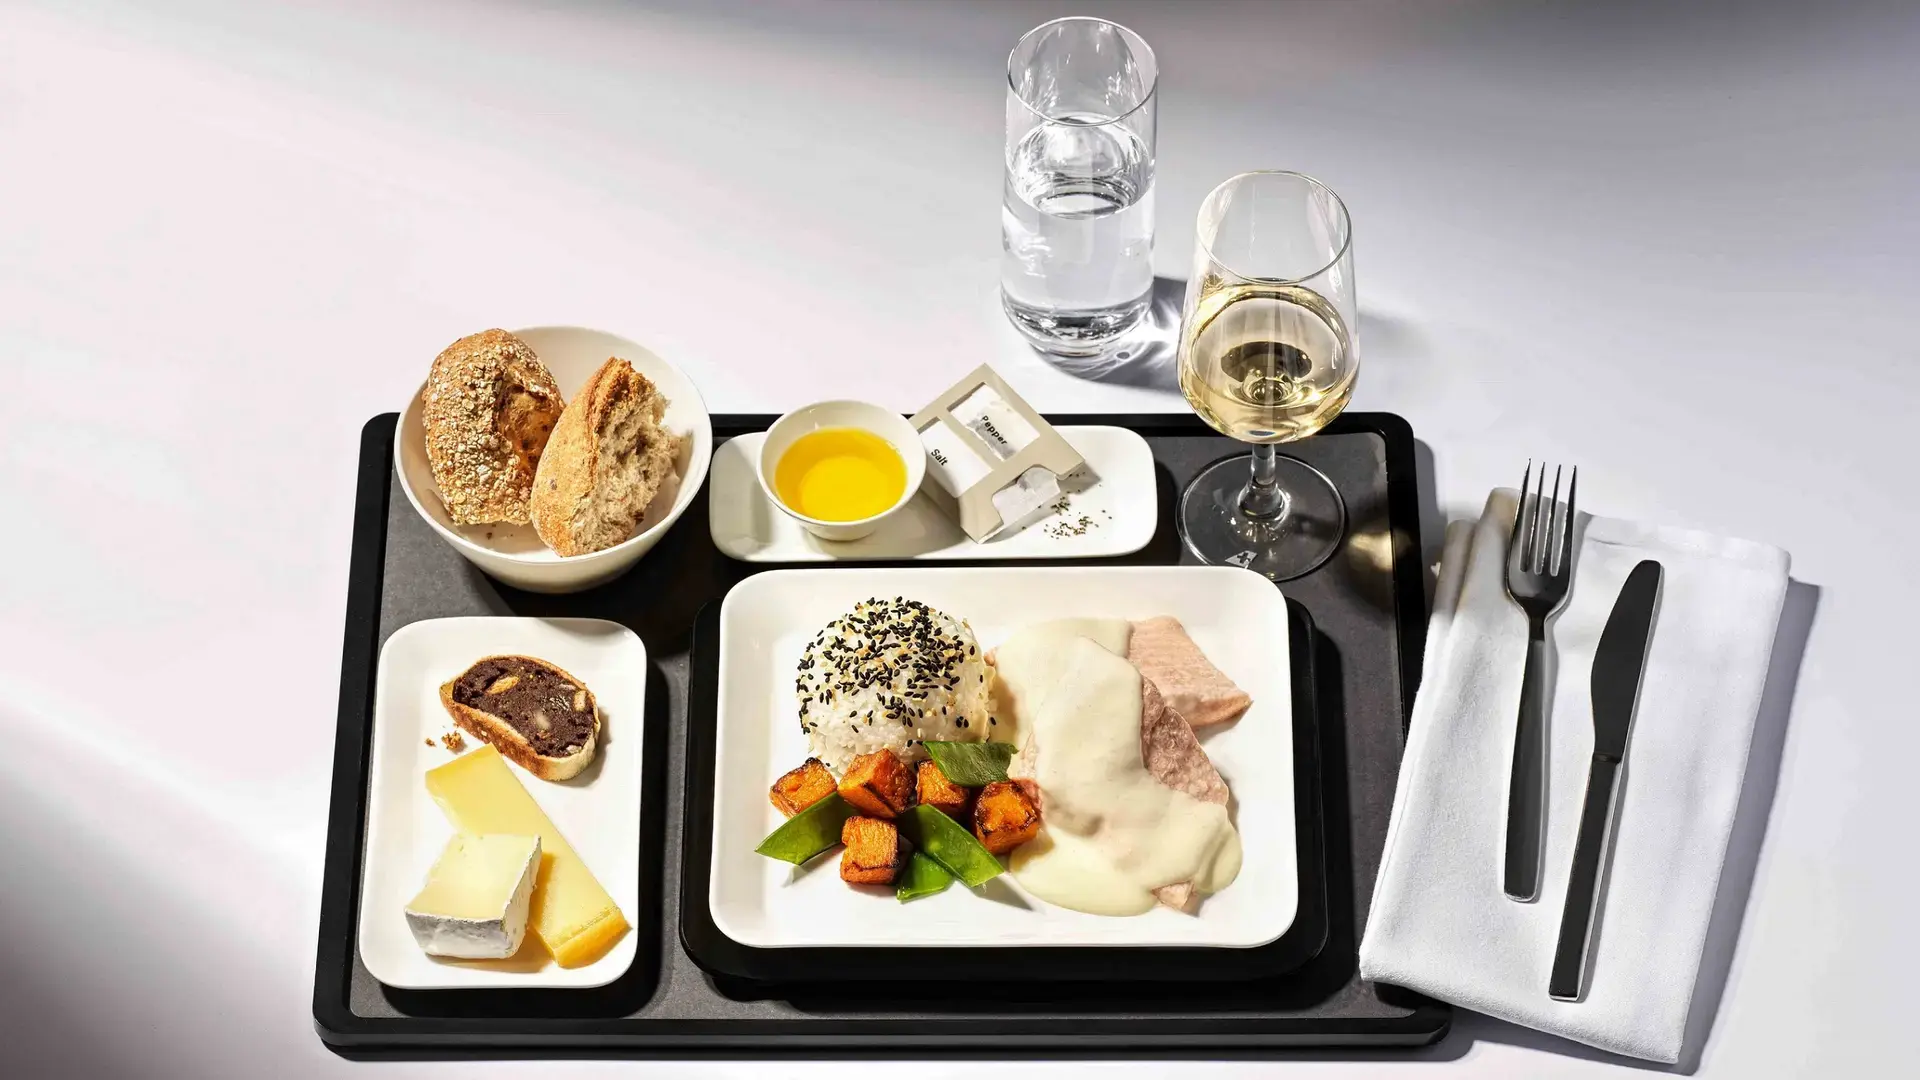 a meal served in SWISS business class